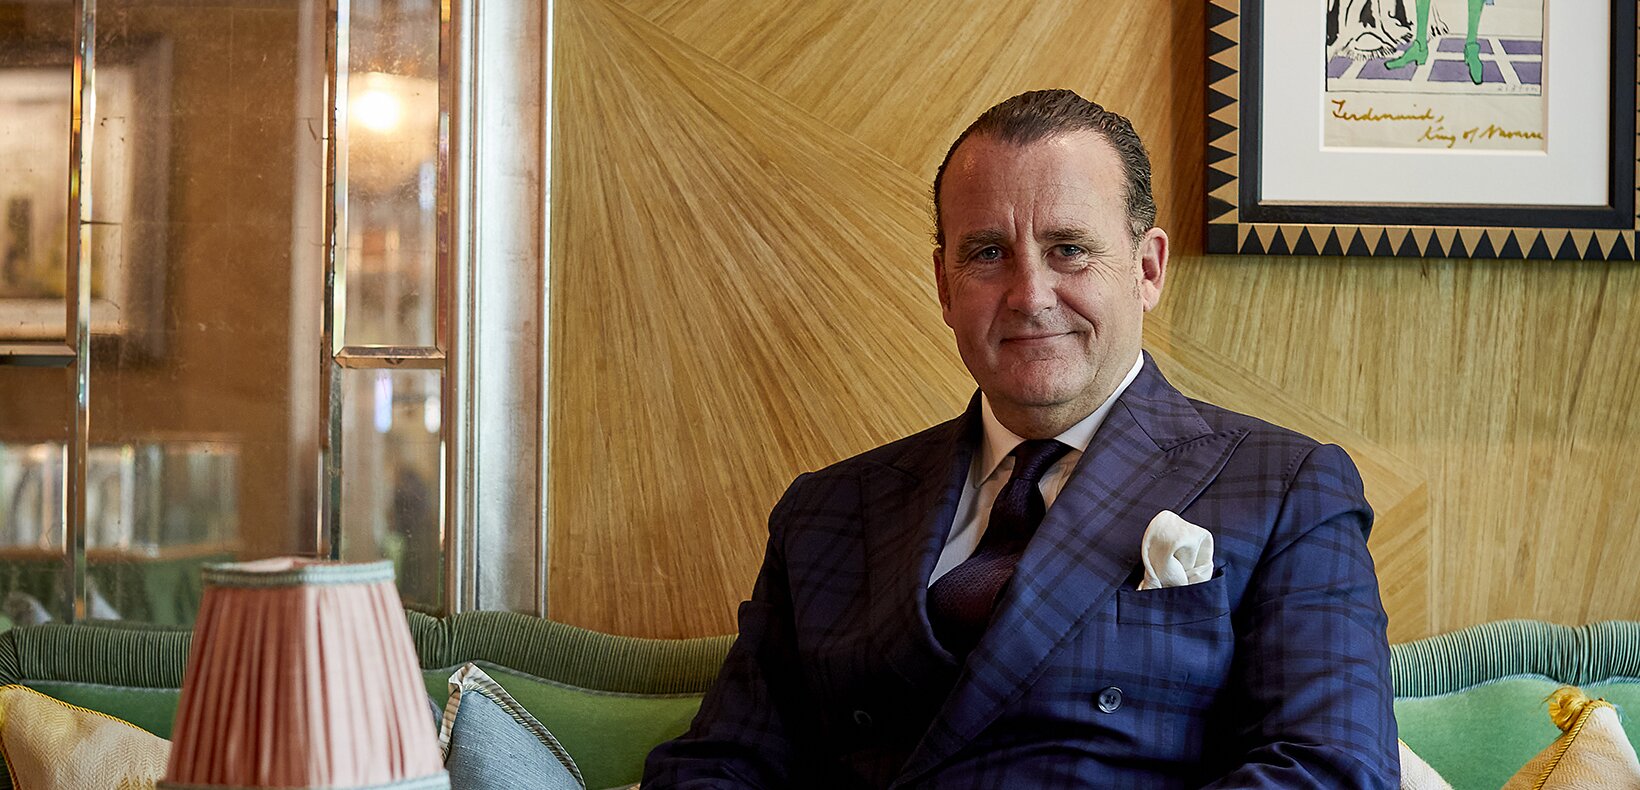 The Caterer interview: Luca Virgilio, general manager of the Dorchester